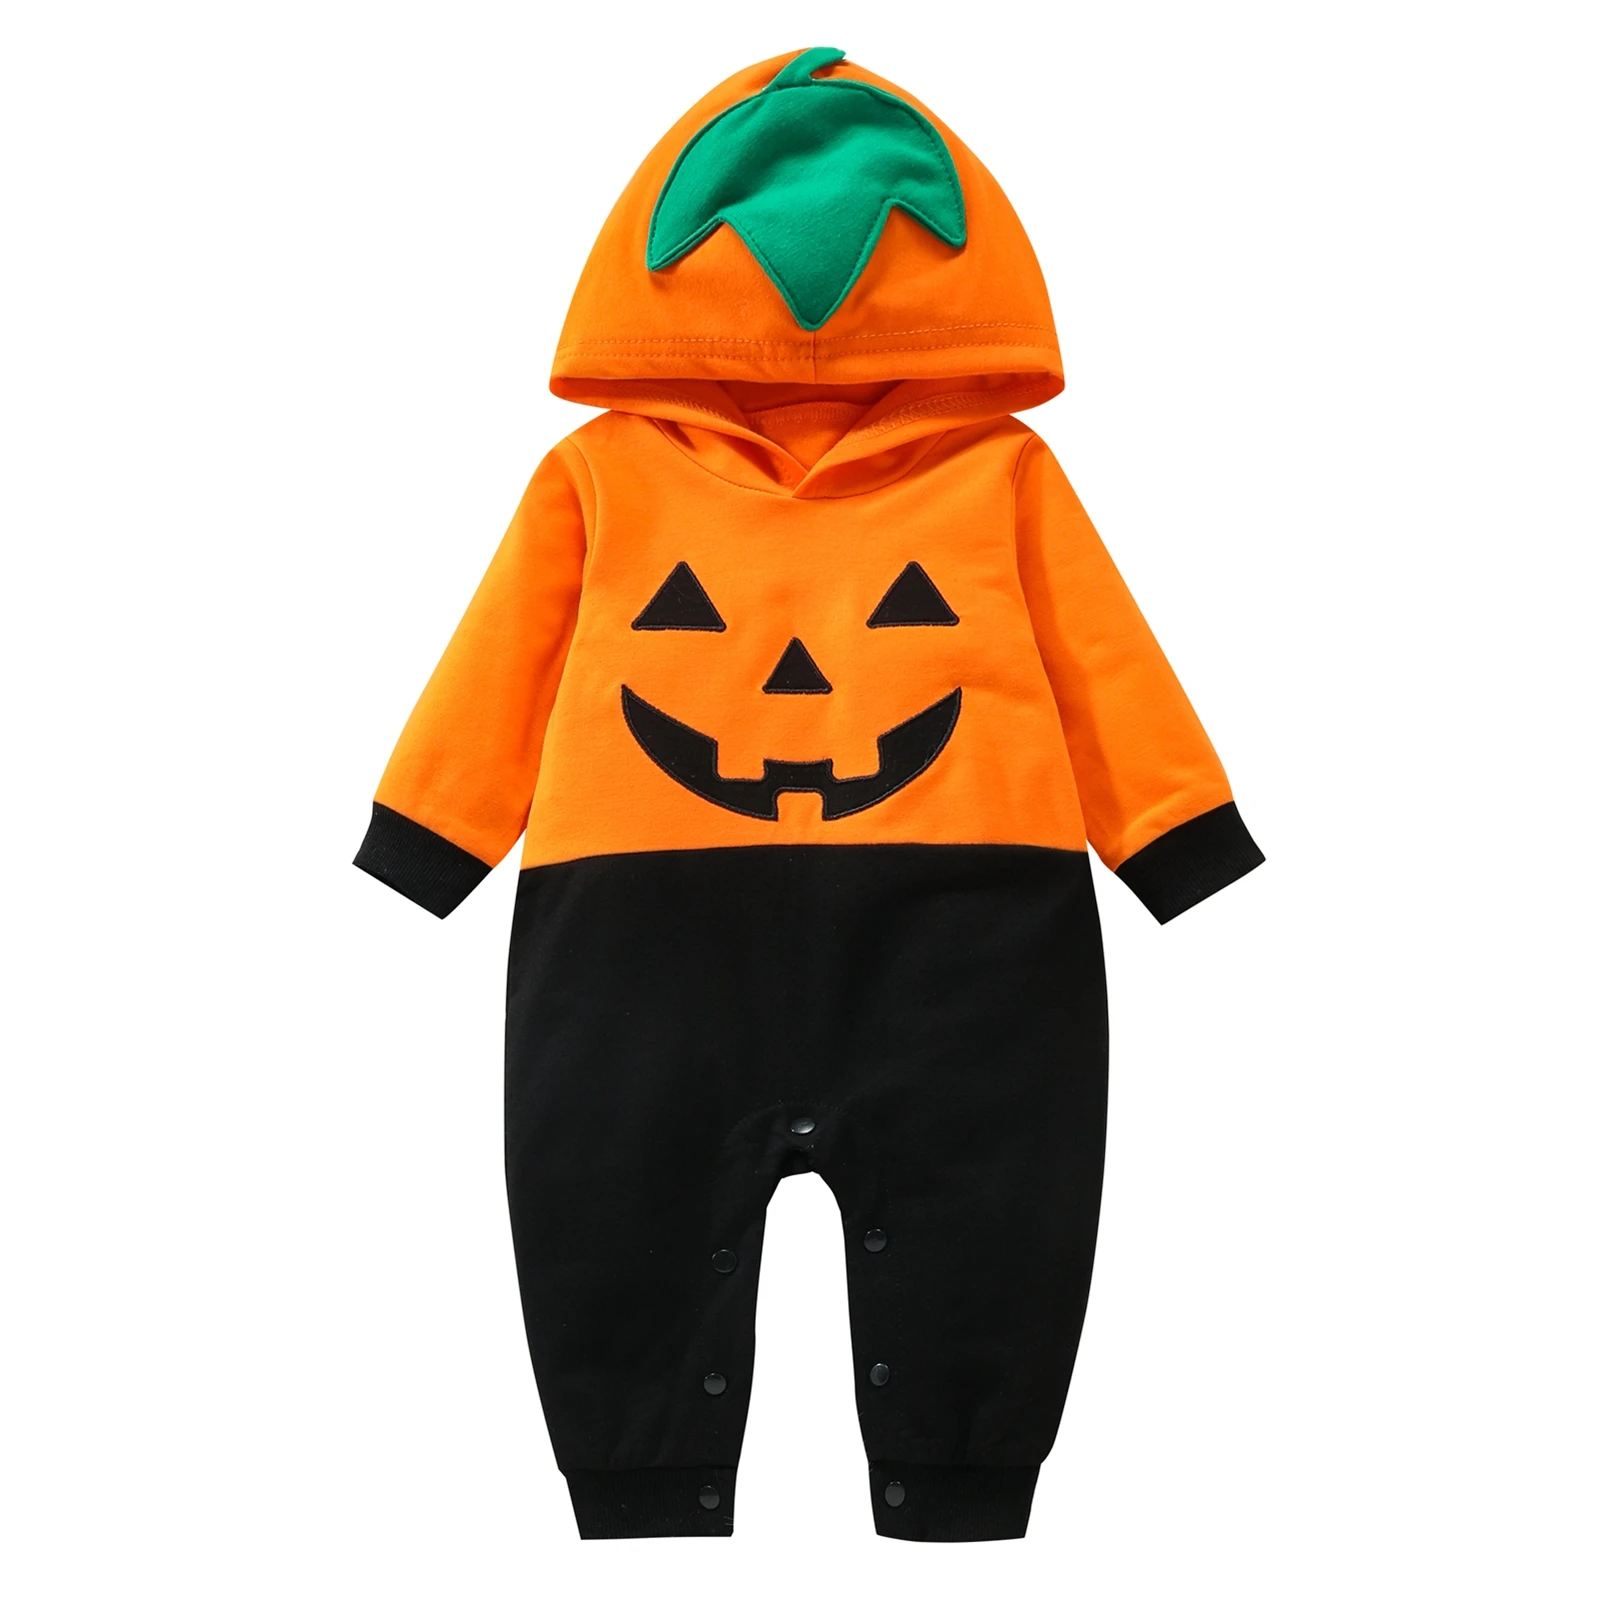 

OPPERIAYA Toddler Kid Halloween Autumn Jumpsuit Applique Smiling Face Hooded Long Sleeves Romper for Baby Girls Boys 0-24 Months